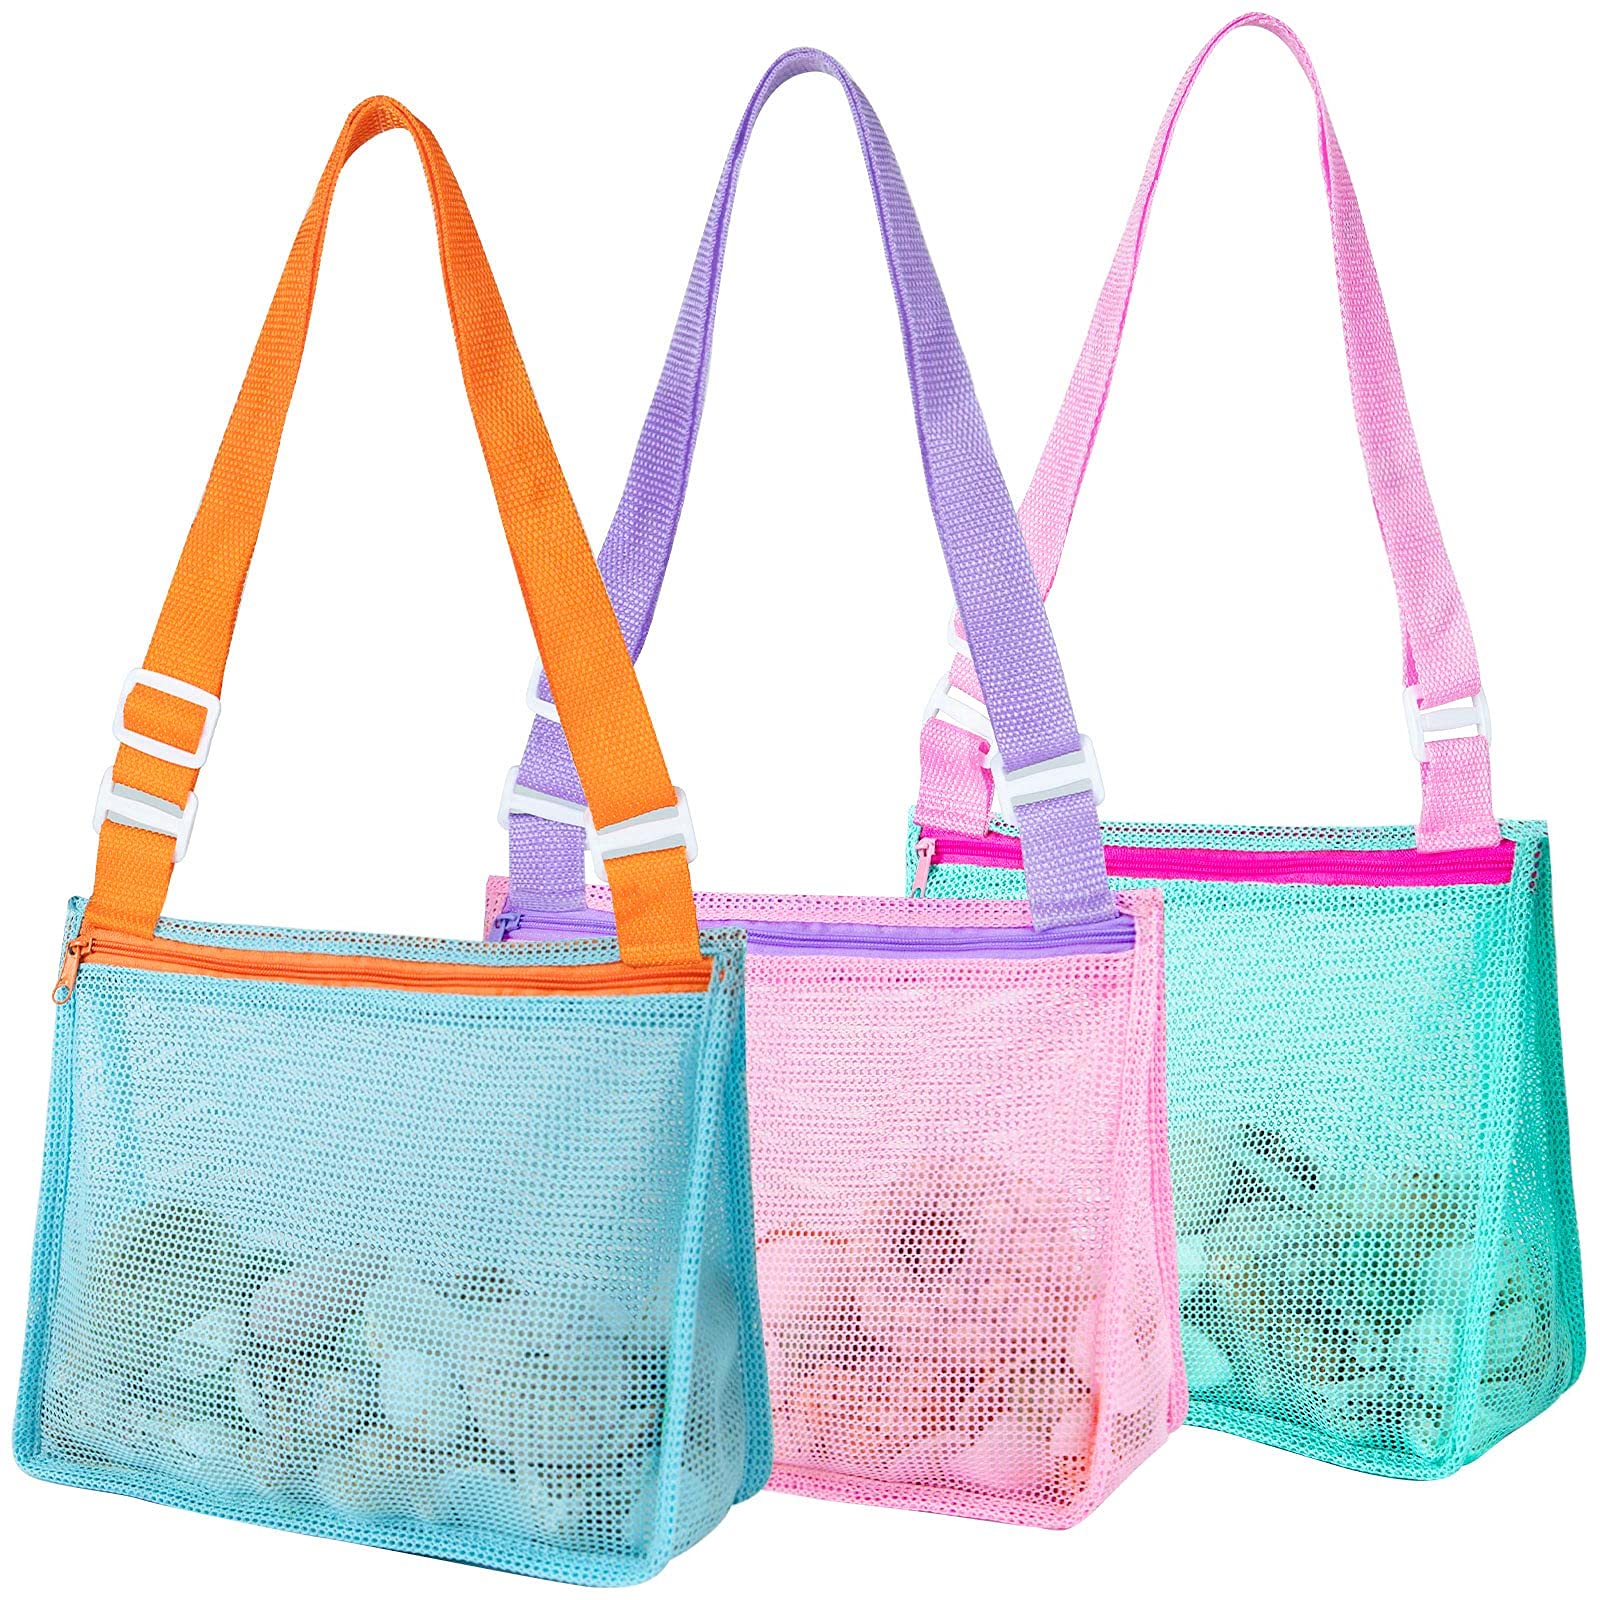 HFXXAD Beach Toys Shell Bags, Kids Shell collecting Bag Beach Sand Toy Totes for Holding Shells Beach Toys, 3 Pcs colorful Mesh Beach B